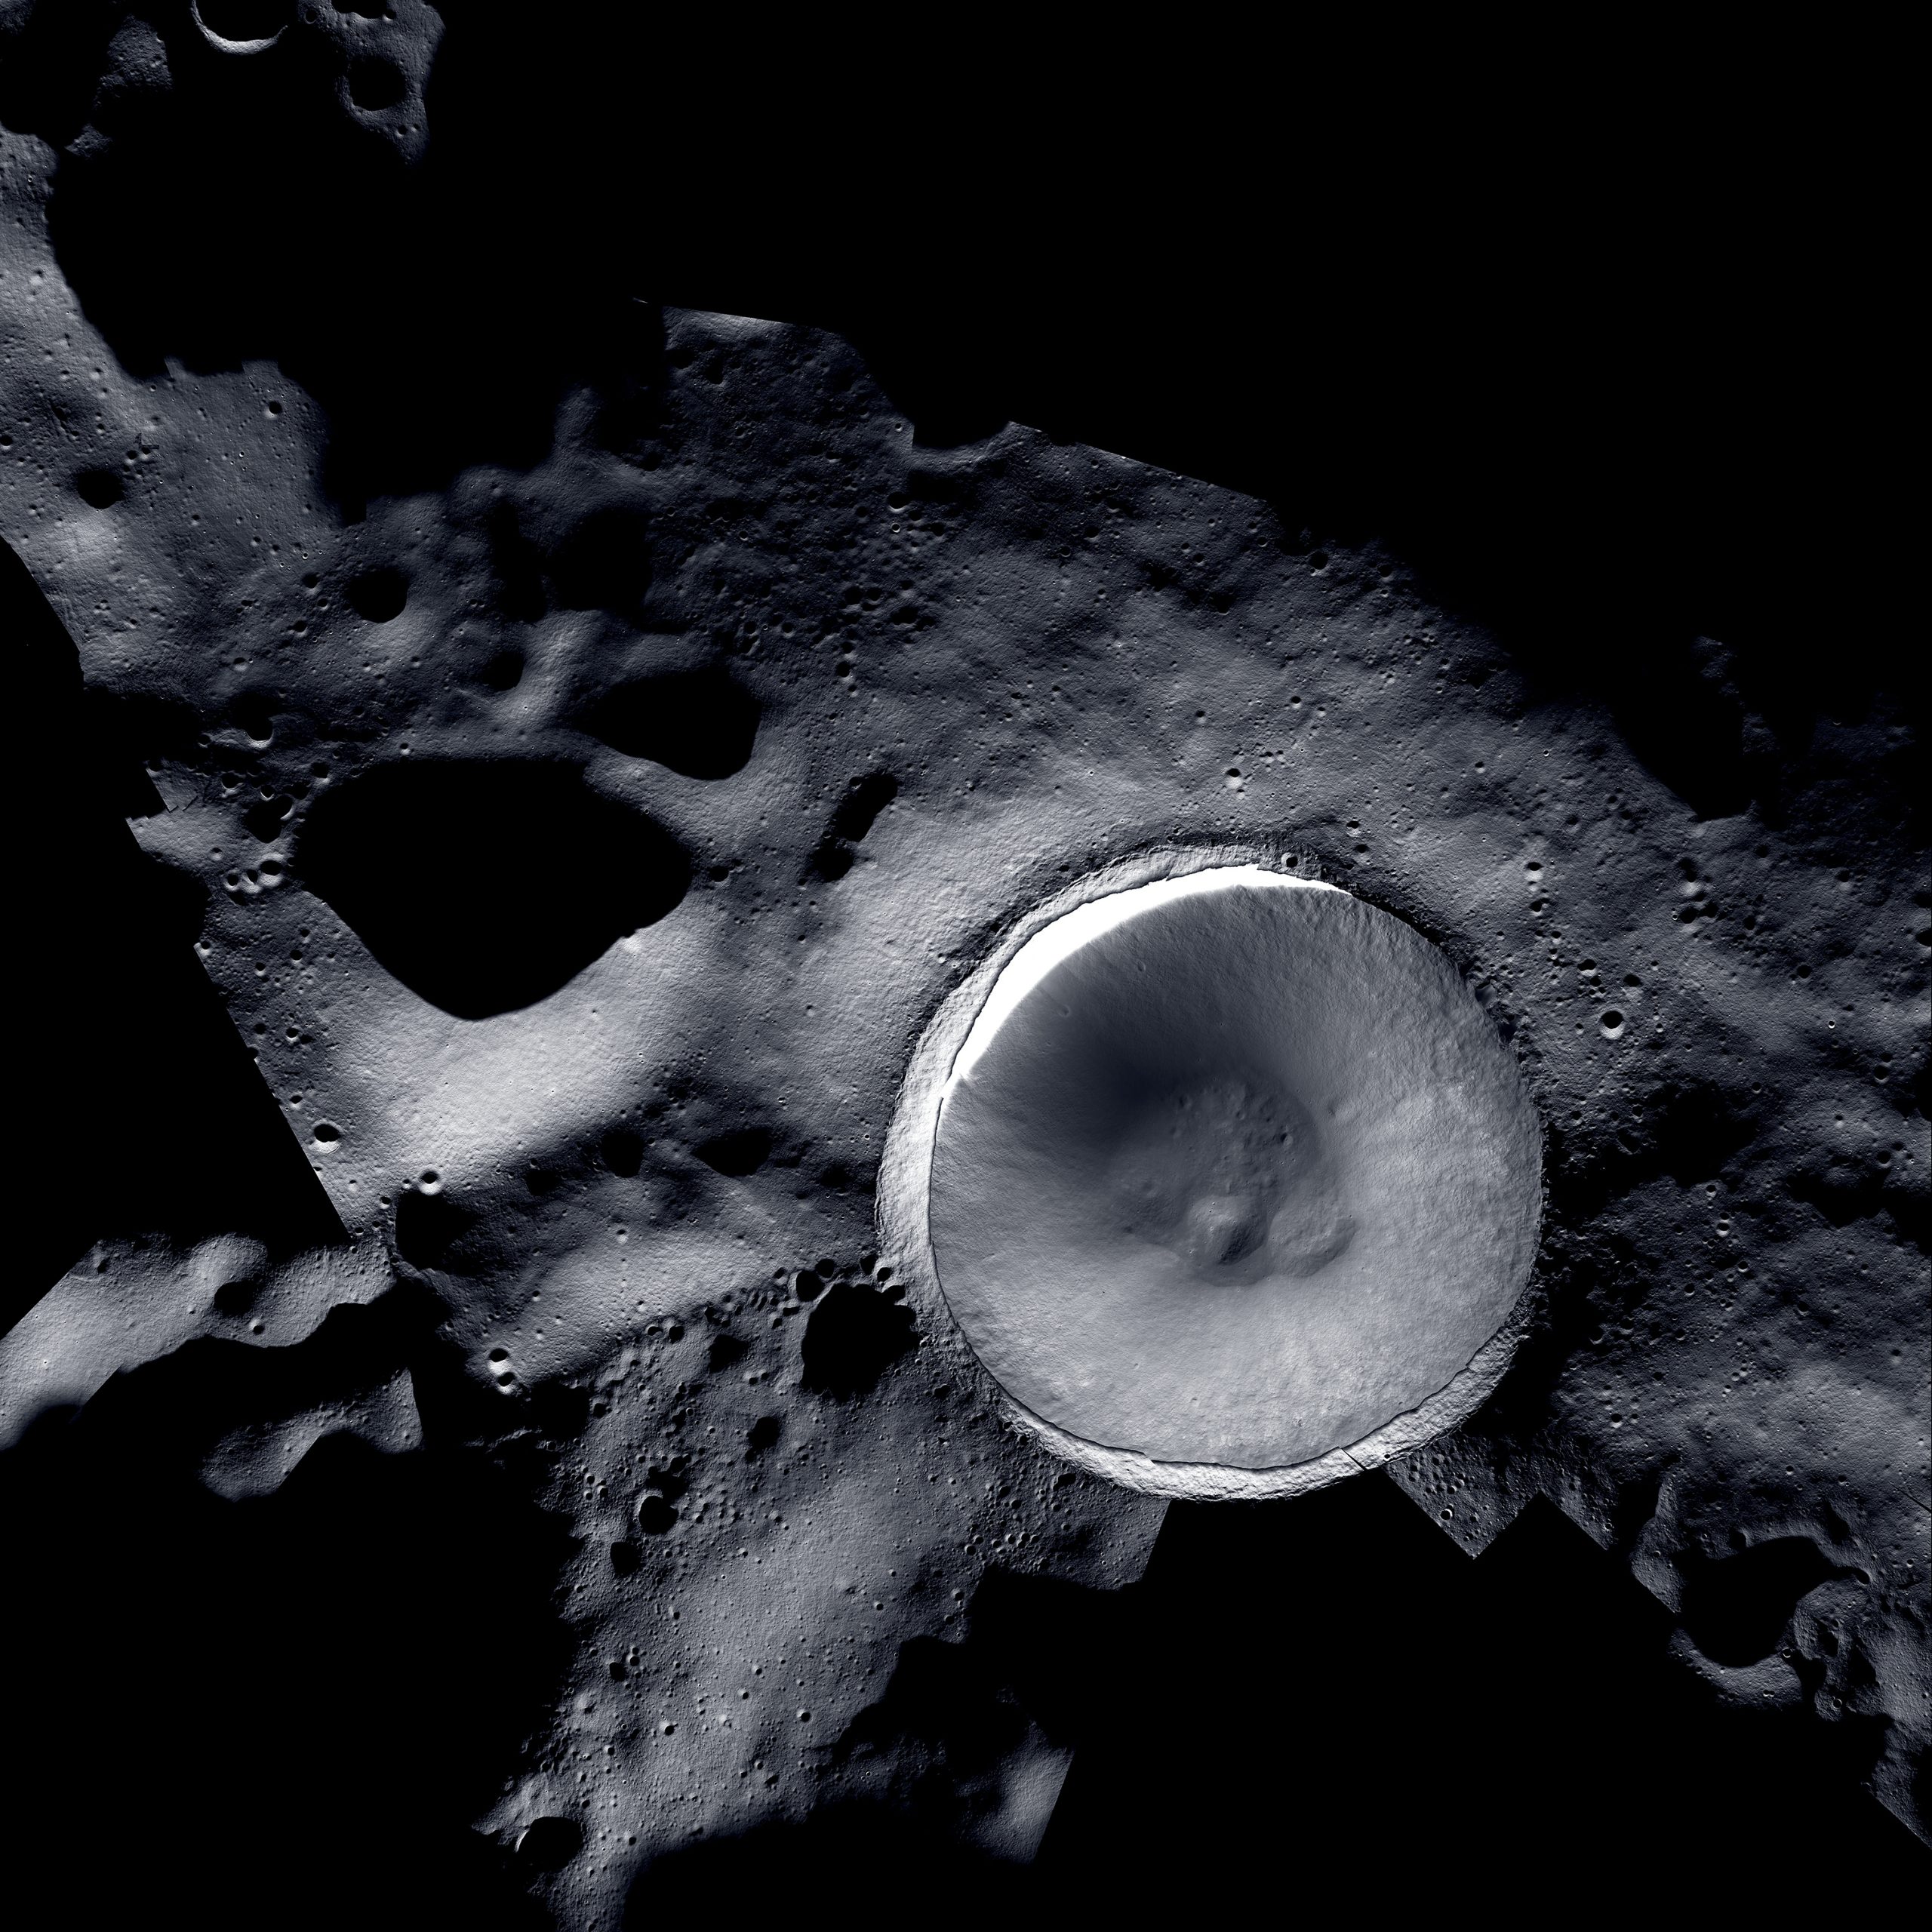 This is a detailed view of the Shackleton CraterCredits: Mosaic created by LROC (Lunar Reconnaissance Orbiter) and ShadowCam teams with images provided by NASA/KARI/ASU